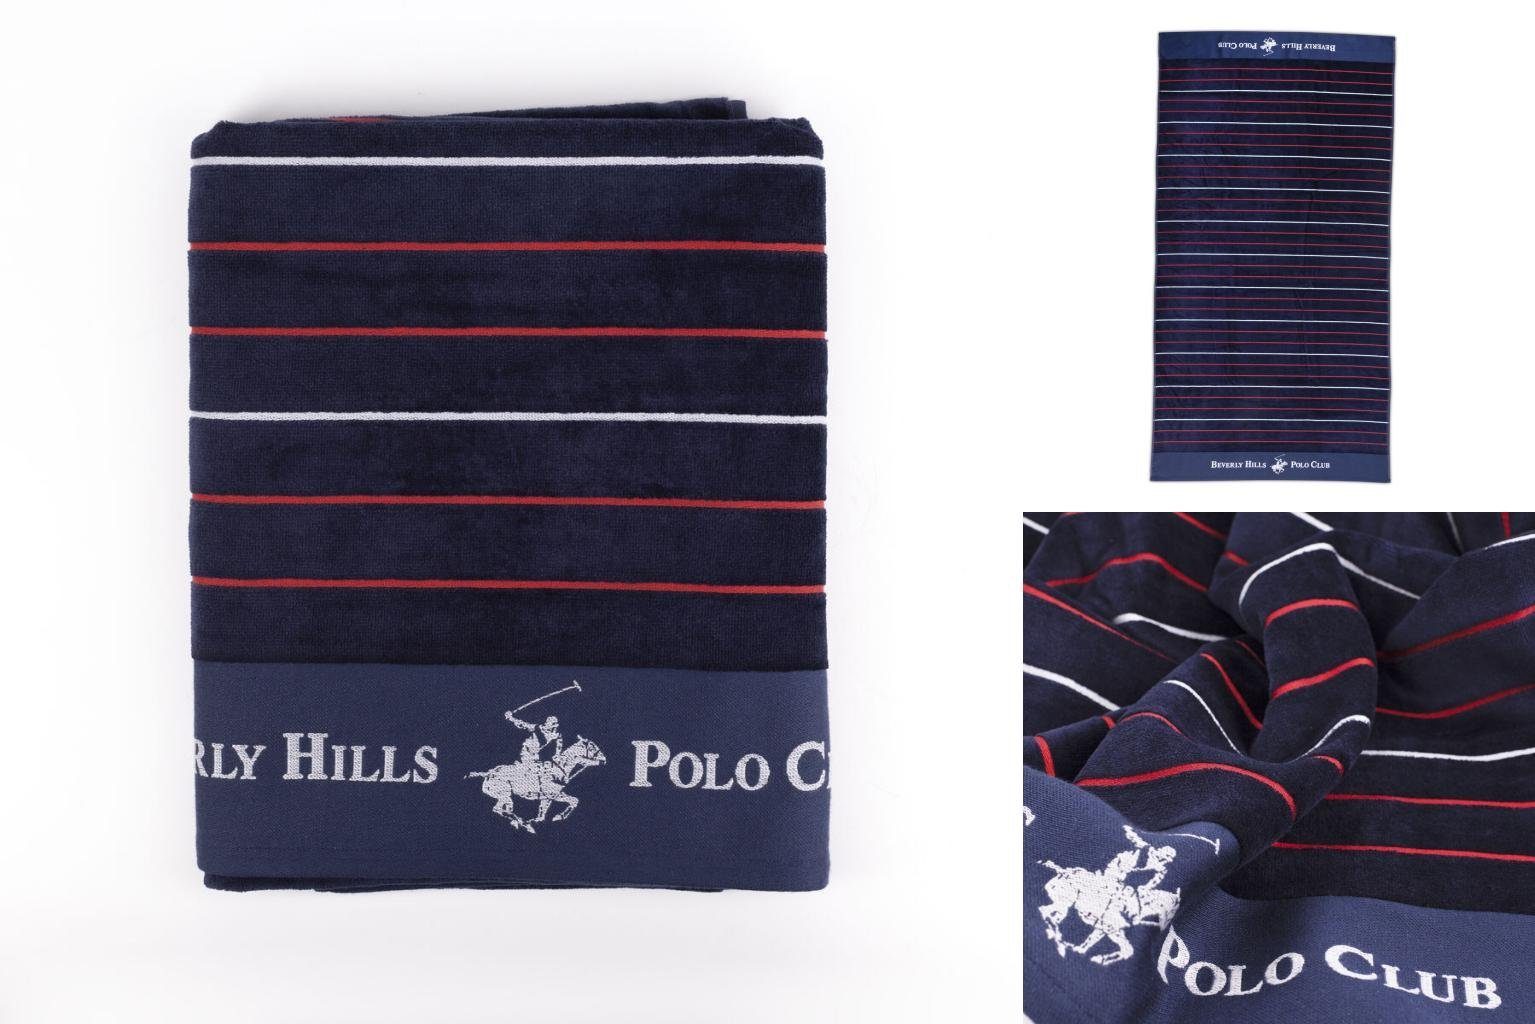 BEVERLY HILLS POLO CLUB Handtuch Strandbadetuch Beverly Hills Polo Club Blau 90 x 160 cm Handtuch